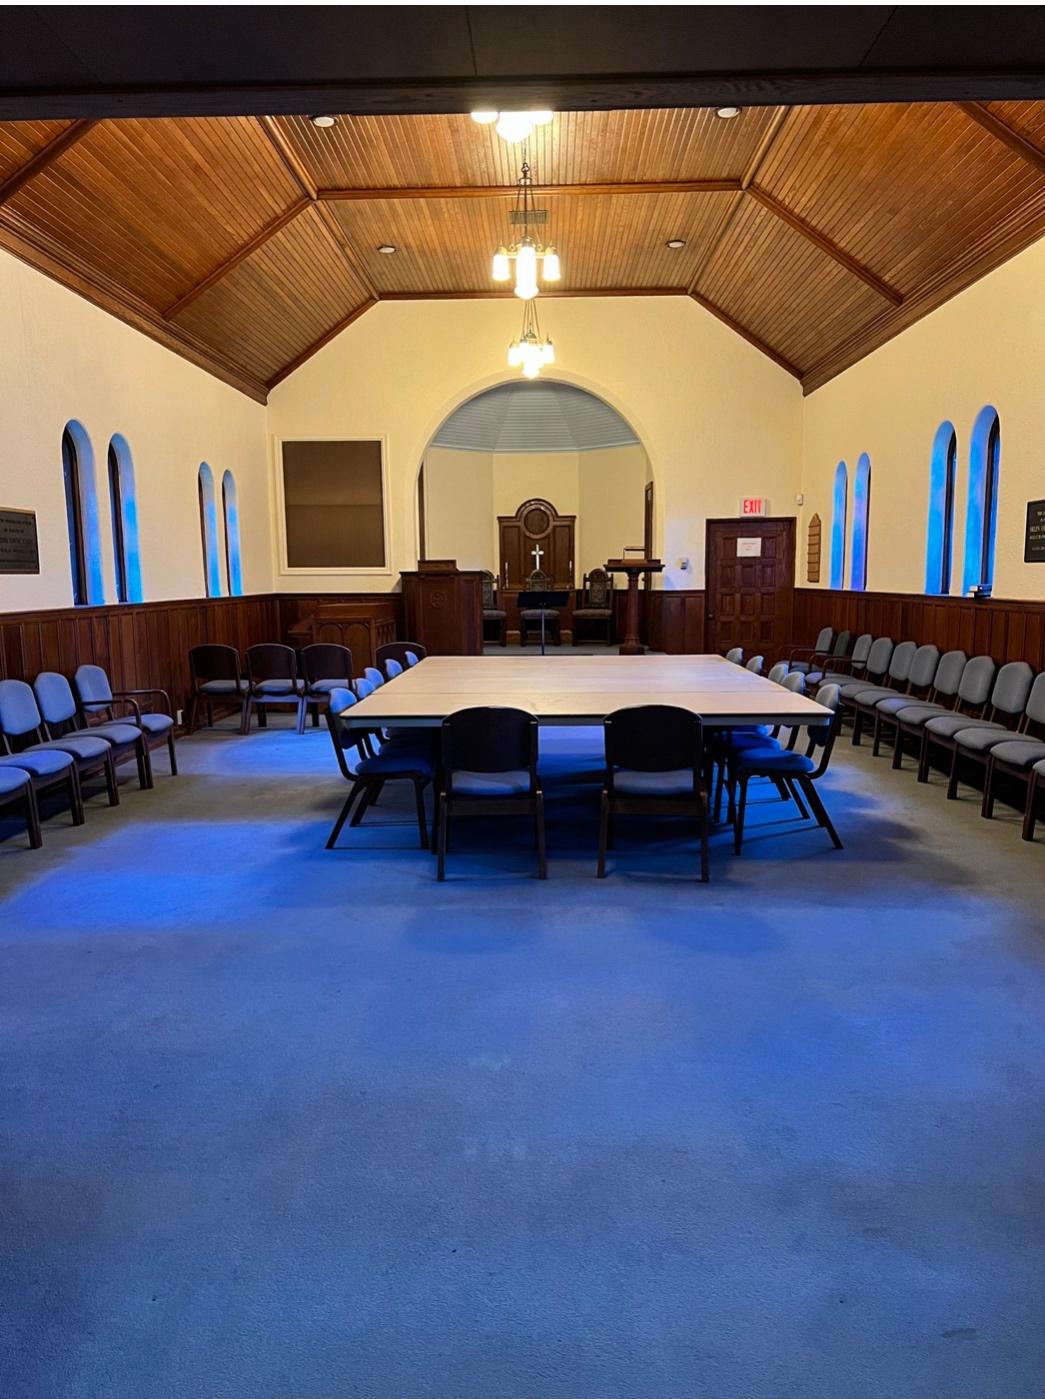 The Intimate Chapel: A Space for Reflection and Small Gatherings at Immanuel Congregational Church